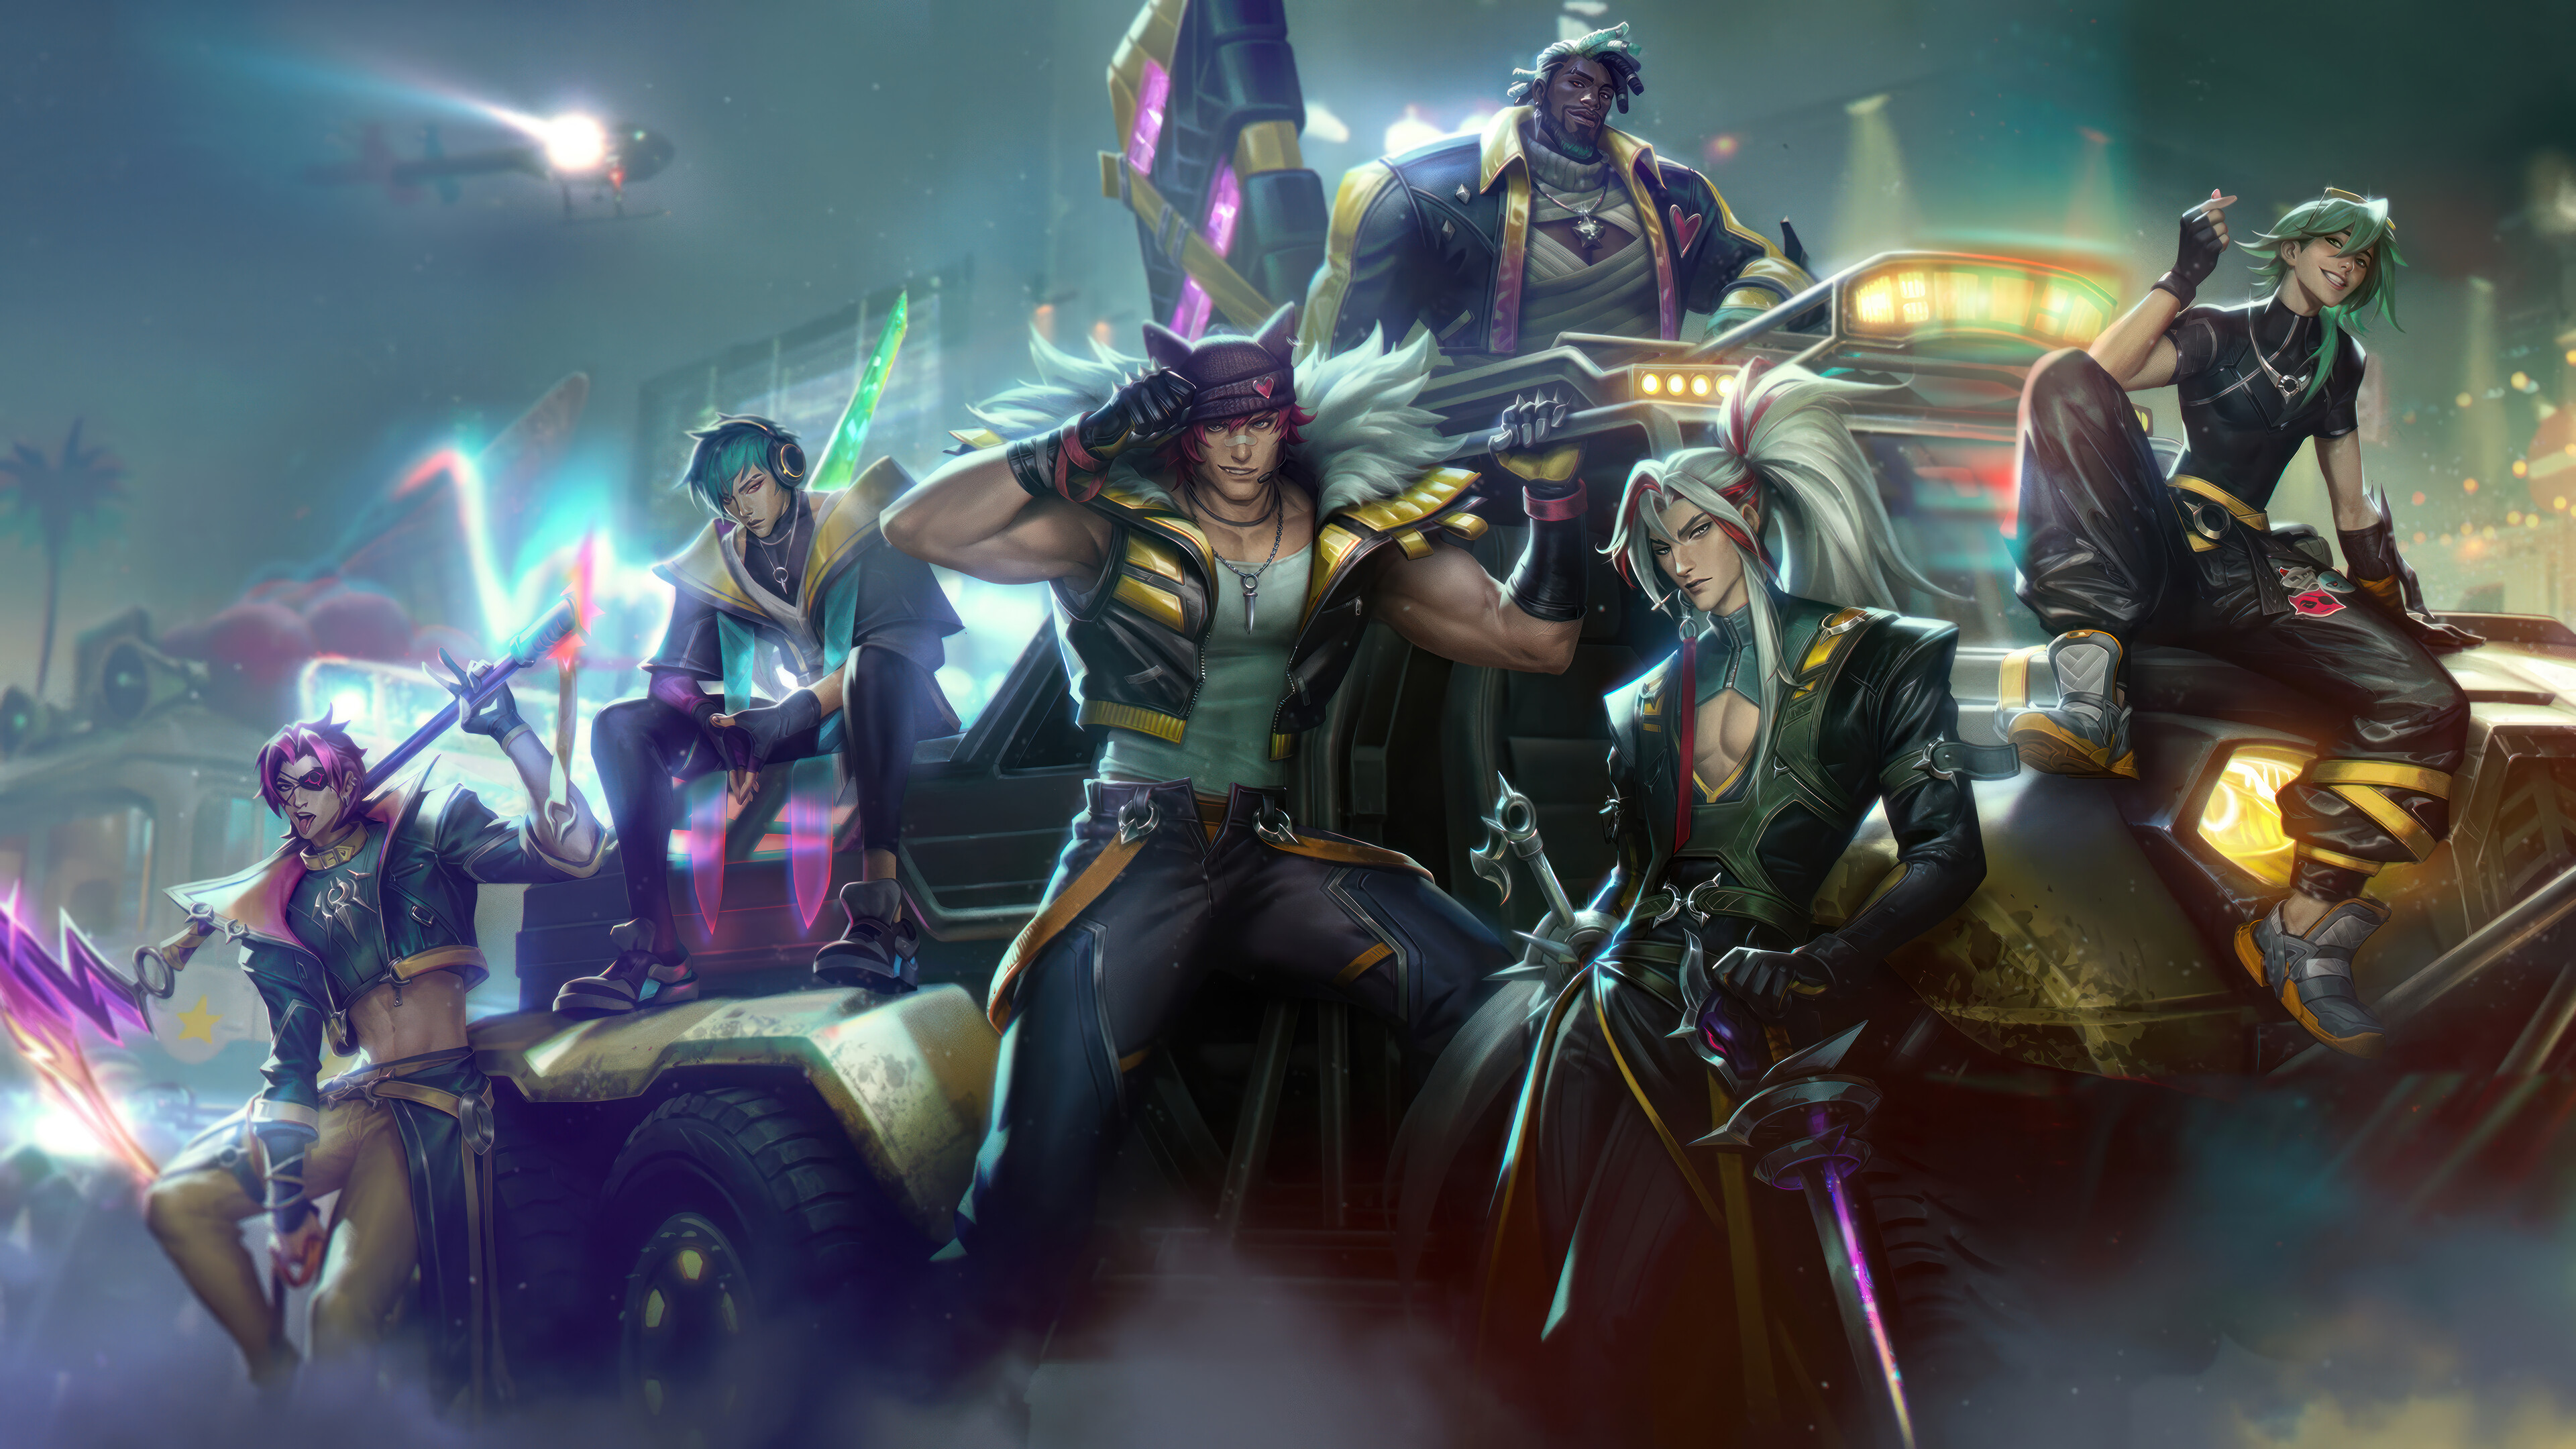 General 3840x2160 League of Legends Heartsteel (League of Legends) Sett (League of Legends) Aphelios (League of legends) Kayn (League of Legends) Ezreal (League Of Legends) Yone (League of Legends) K'Sante (League of Legends) video game characters video game boys muscles video game art jacket gloves fingerless gloves video games sitting smiling looking at viewer